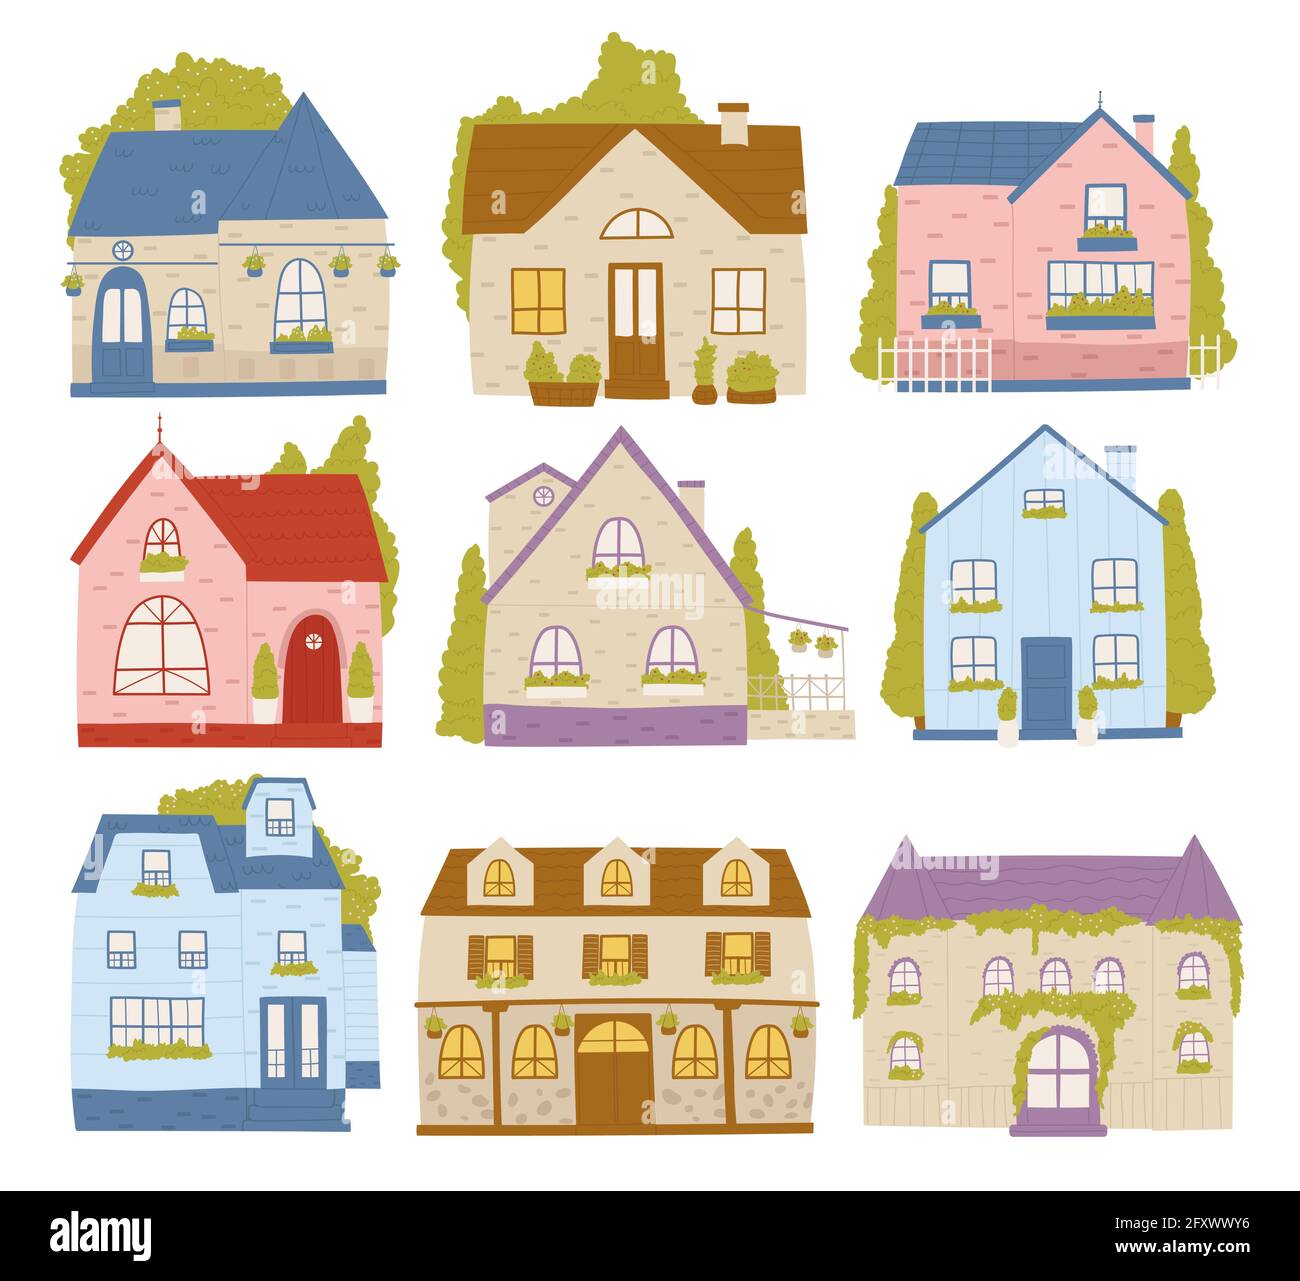 Town houses, neighborhood residence cartoon buildings vector illustration set. Cartoon cute colourful cottage cabin houses collection, residential architecture diversity for neighbors isolated Stock Vector